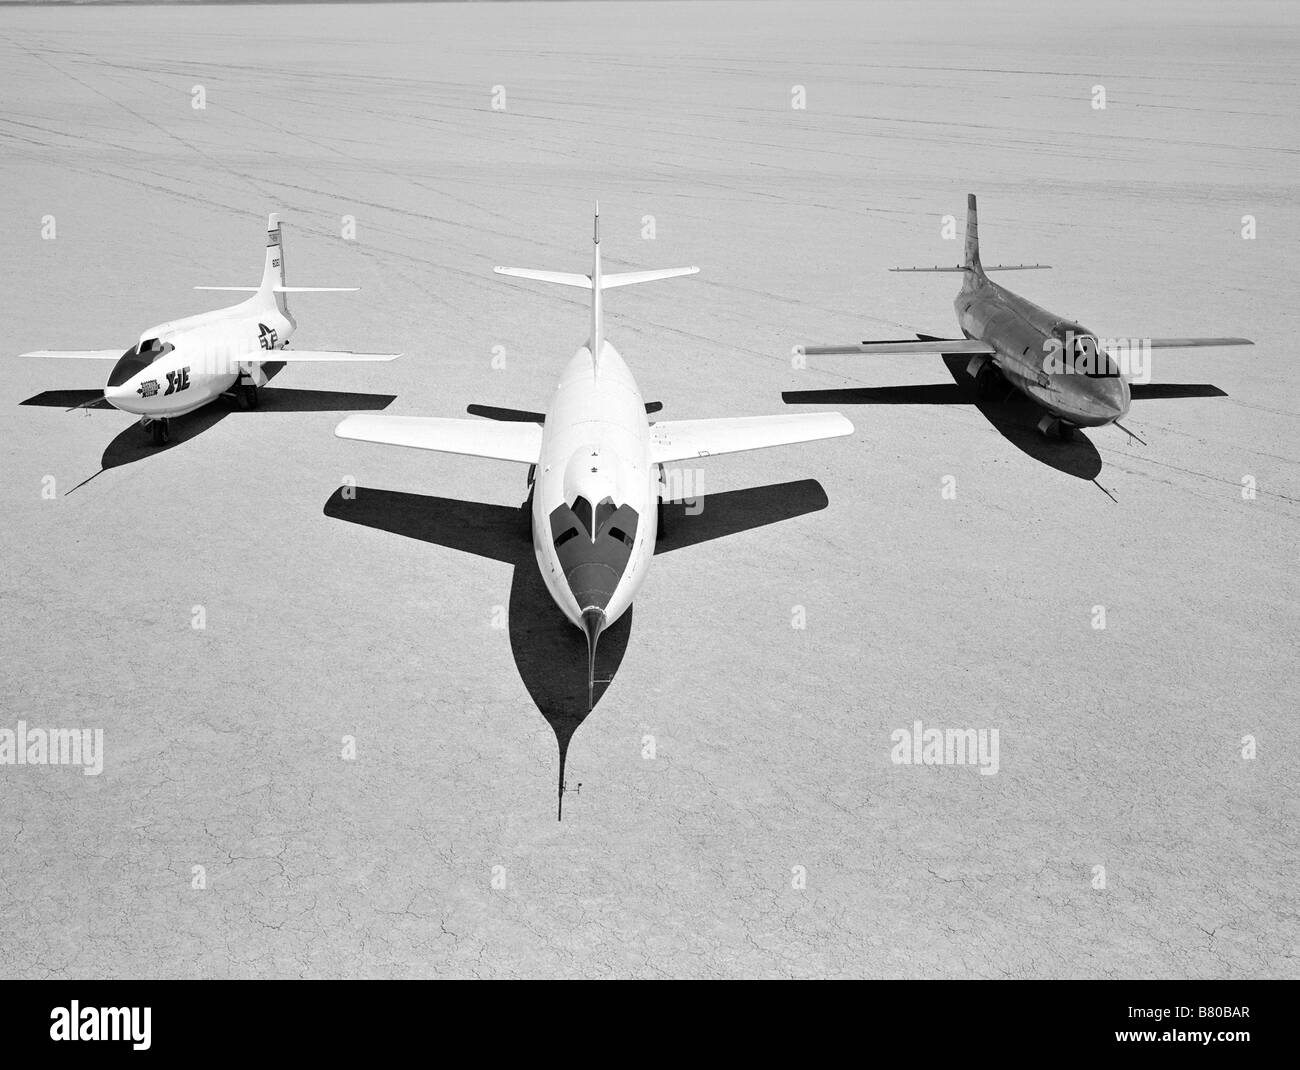 Early NACA research aircraft on the lakebed at the High Speed Research Station in 1955: Left to right: X-1E, D-558-II, X-1B Stock Photo